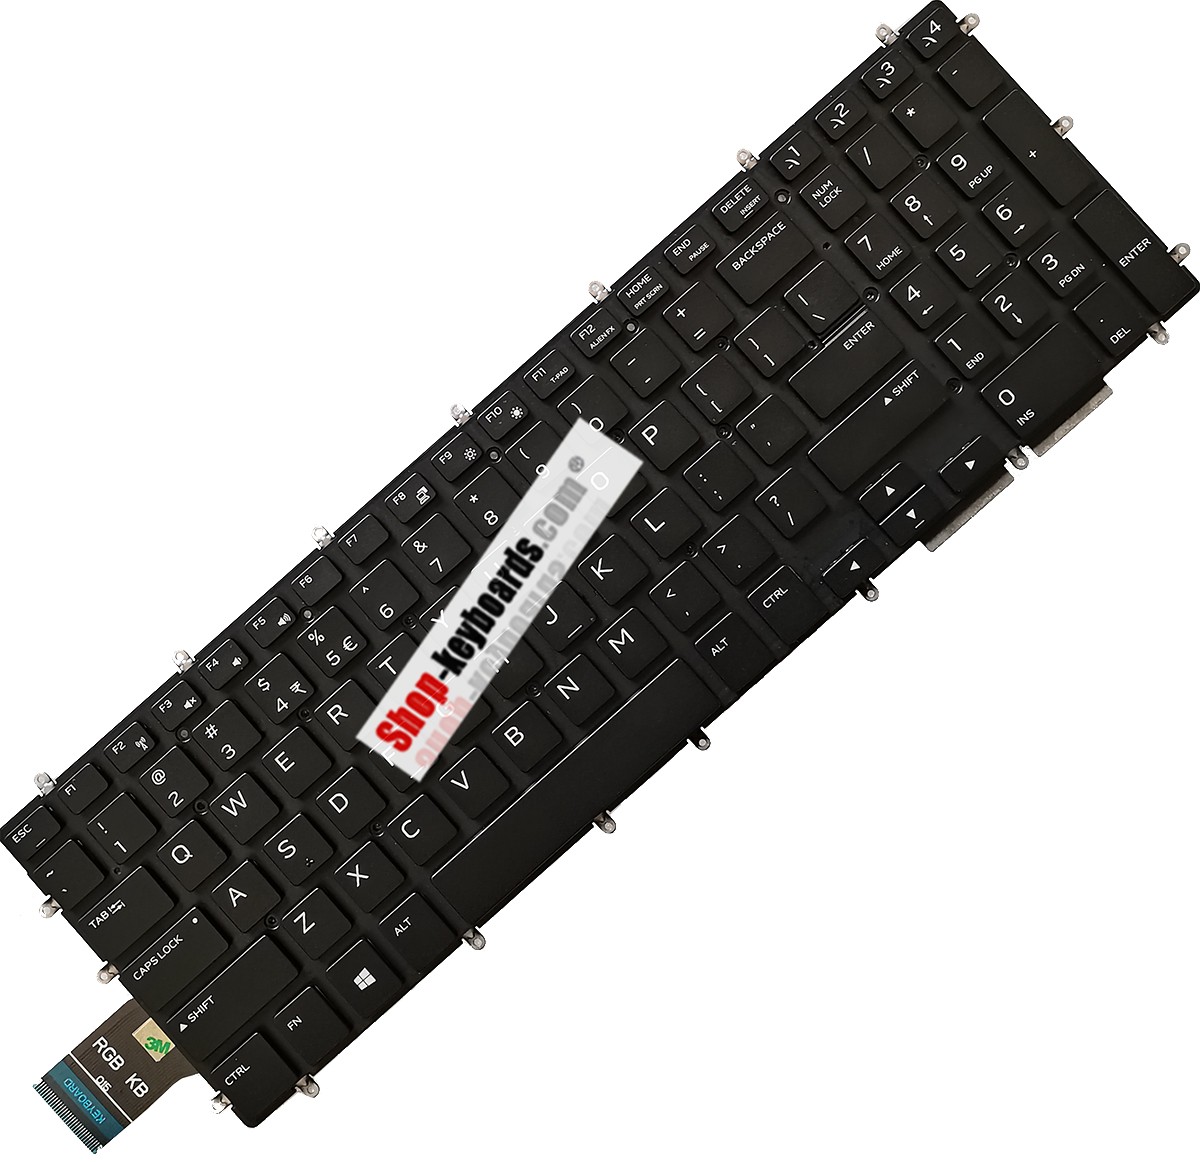 Dell M15-8086 Keyboard replacement